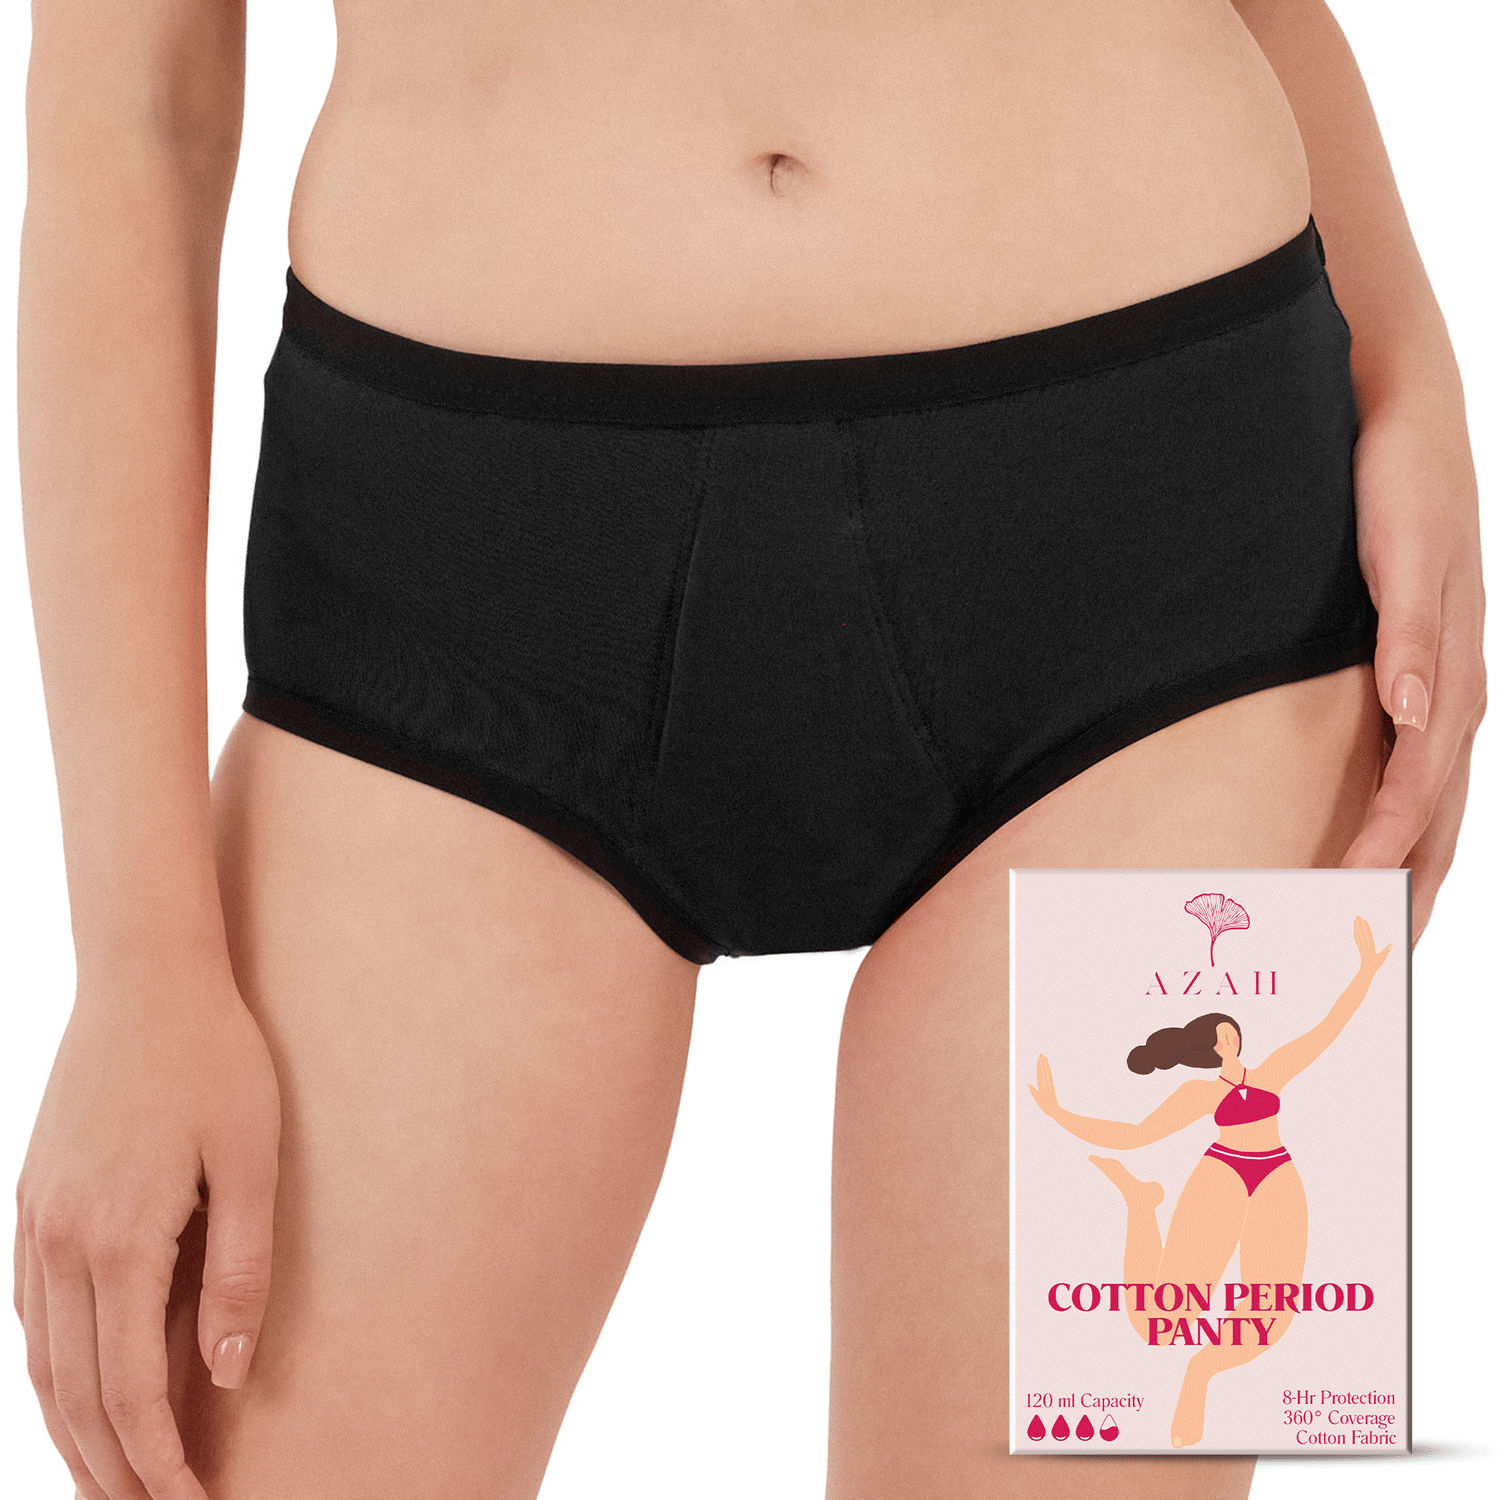 https://media6.ppl-media.com//tr:h-750,w-750,c-at_max,dpr-2/static/img/product/350822/azah-cotton-period-panties-for-women-leak-proof-and-super-soft-5x-more-absorption-small_1_display_1681302824_17fa967a.jpg